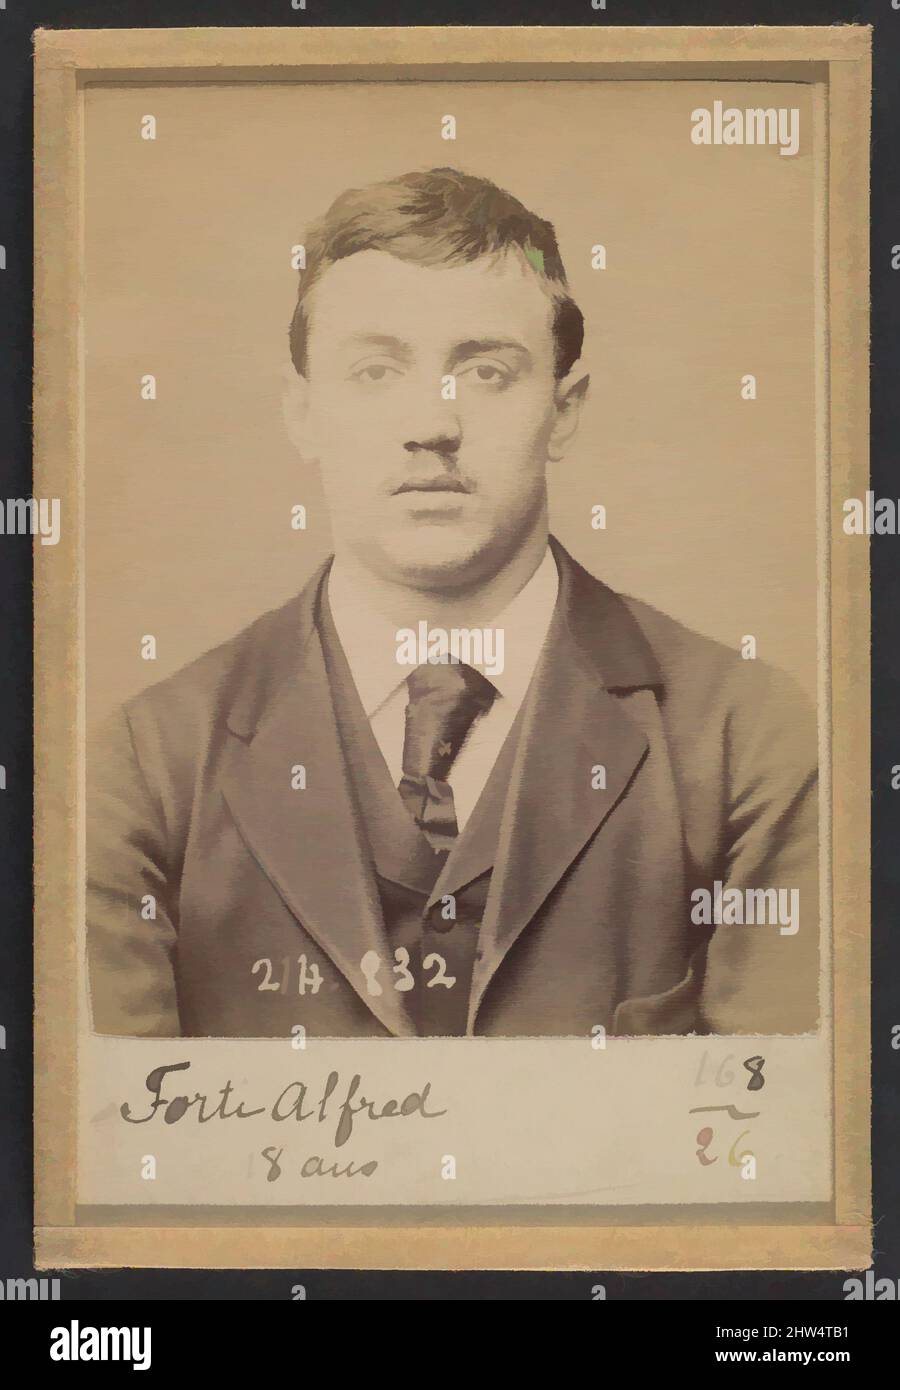 Art inspired by Forti. Alfred. 18 ans, né à Milan (Italie). Restaurateur. Anarchiste. 27/2/94., 1894, Albumen silver print from glass negative, 10.5 x 7 x 0.5 cm (4 1/8 x 2 3/4 x 3/16 in.) each, Photographs, Alphonse Bertillon (French, 1853–1914), Born into a distinguished family of, Classic works modernized by Artotop with a splash of modernity. Shapes, color and value, eye-catching visual impact on art. Emotions through freedom of artworks in a contemporary way. A timeless message pursuing a wildly creative new direction. Artists turning to the digital medium and creating the Artotop NFT Stock Photo